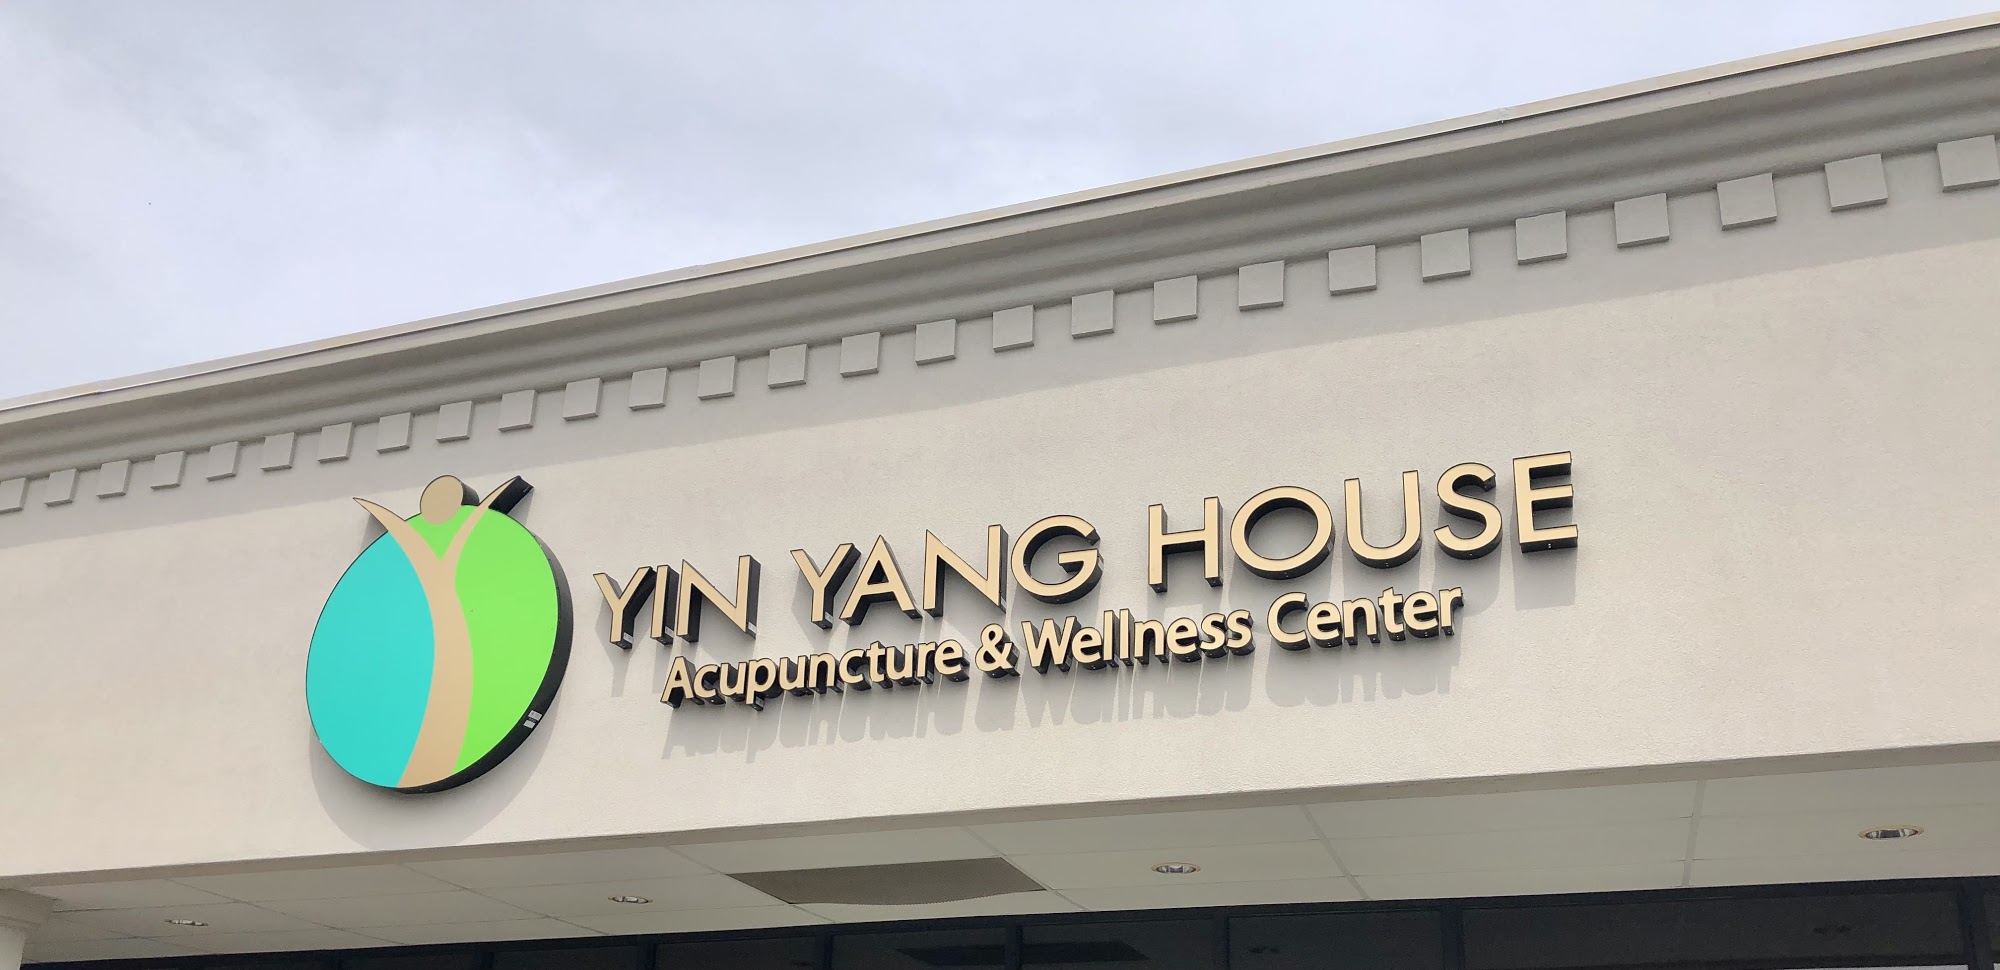 Yin Yang House Acupuncture and Wellness Center